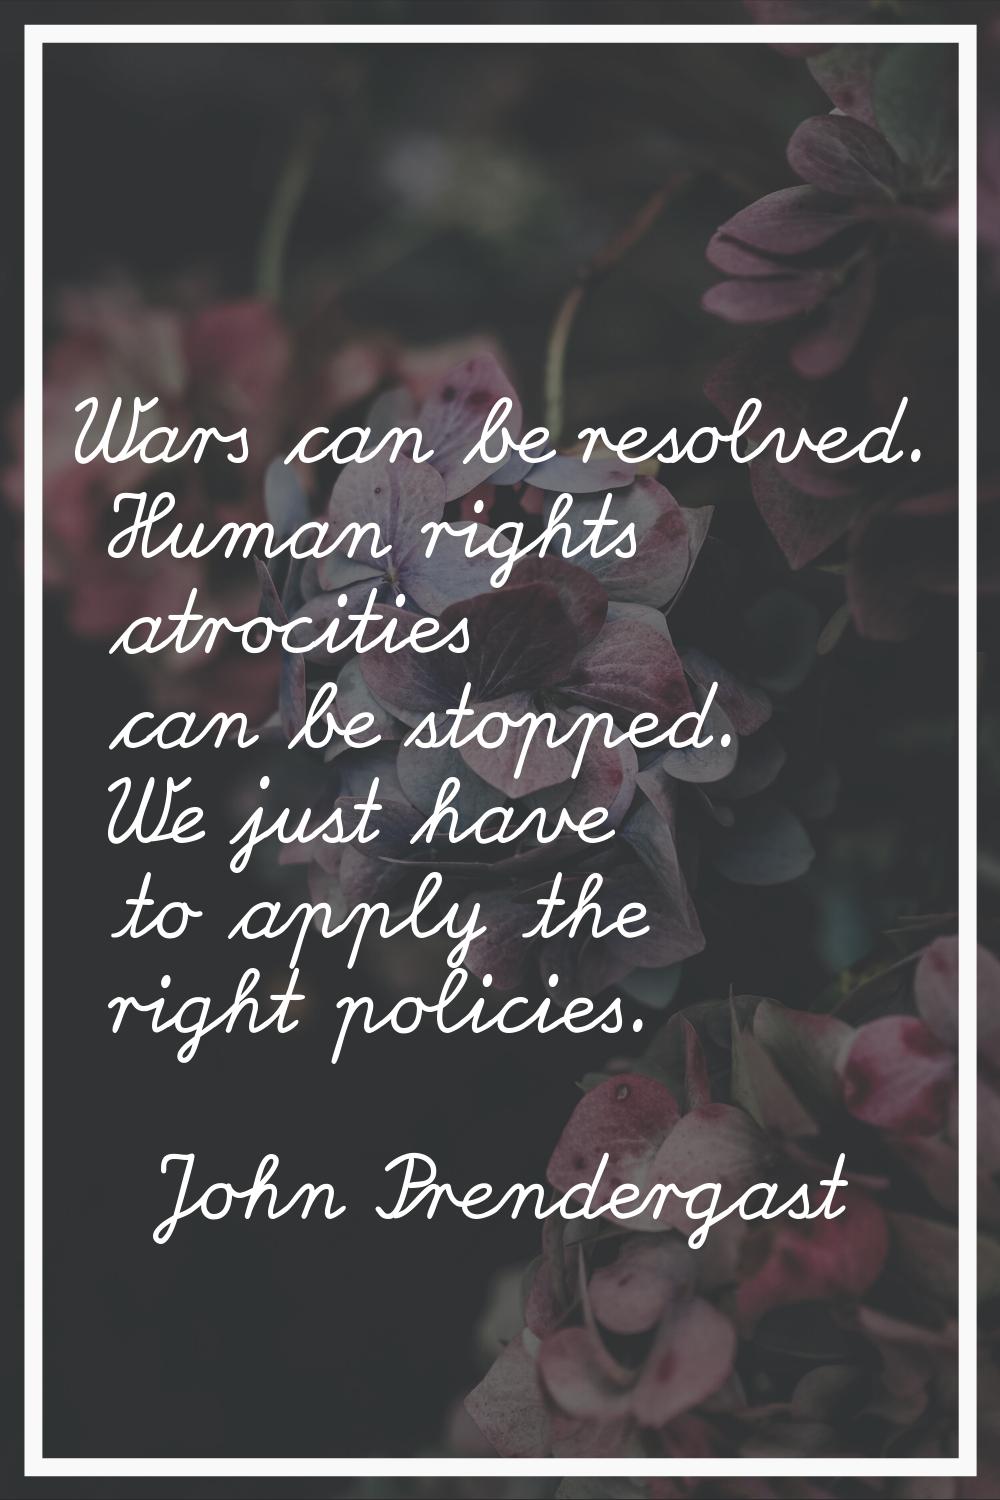 Wars can be resolved. Human rights atrocities can be stopped. We just have to apply the right polic